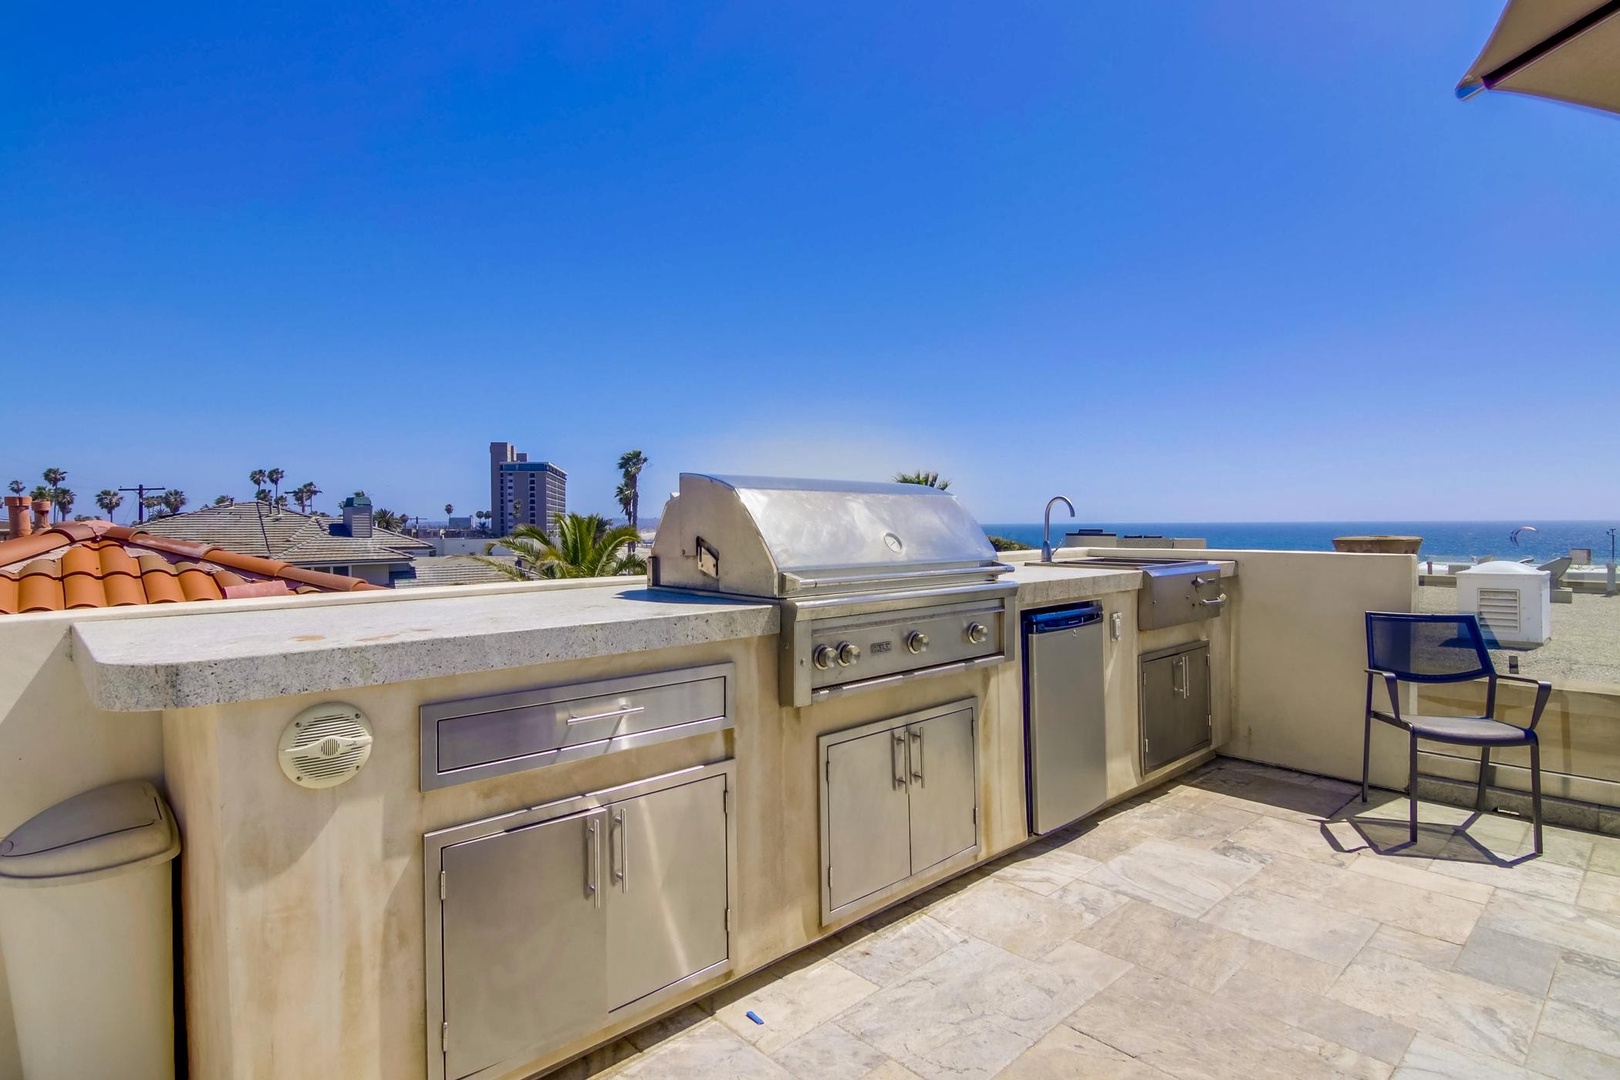 Rooftop BBQ with fridge & sink